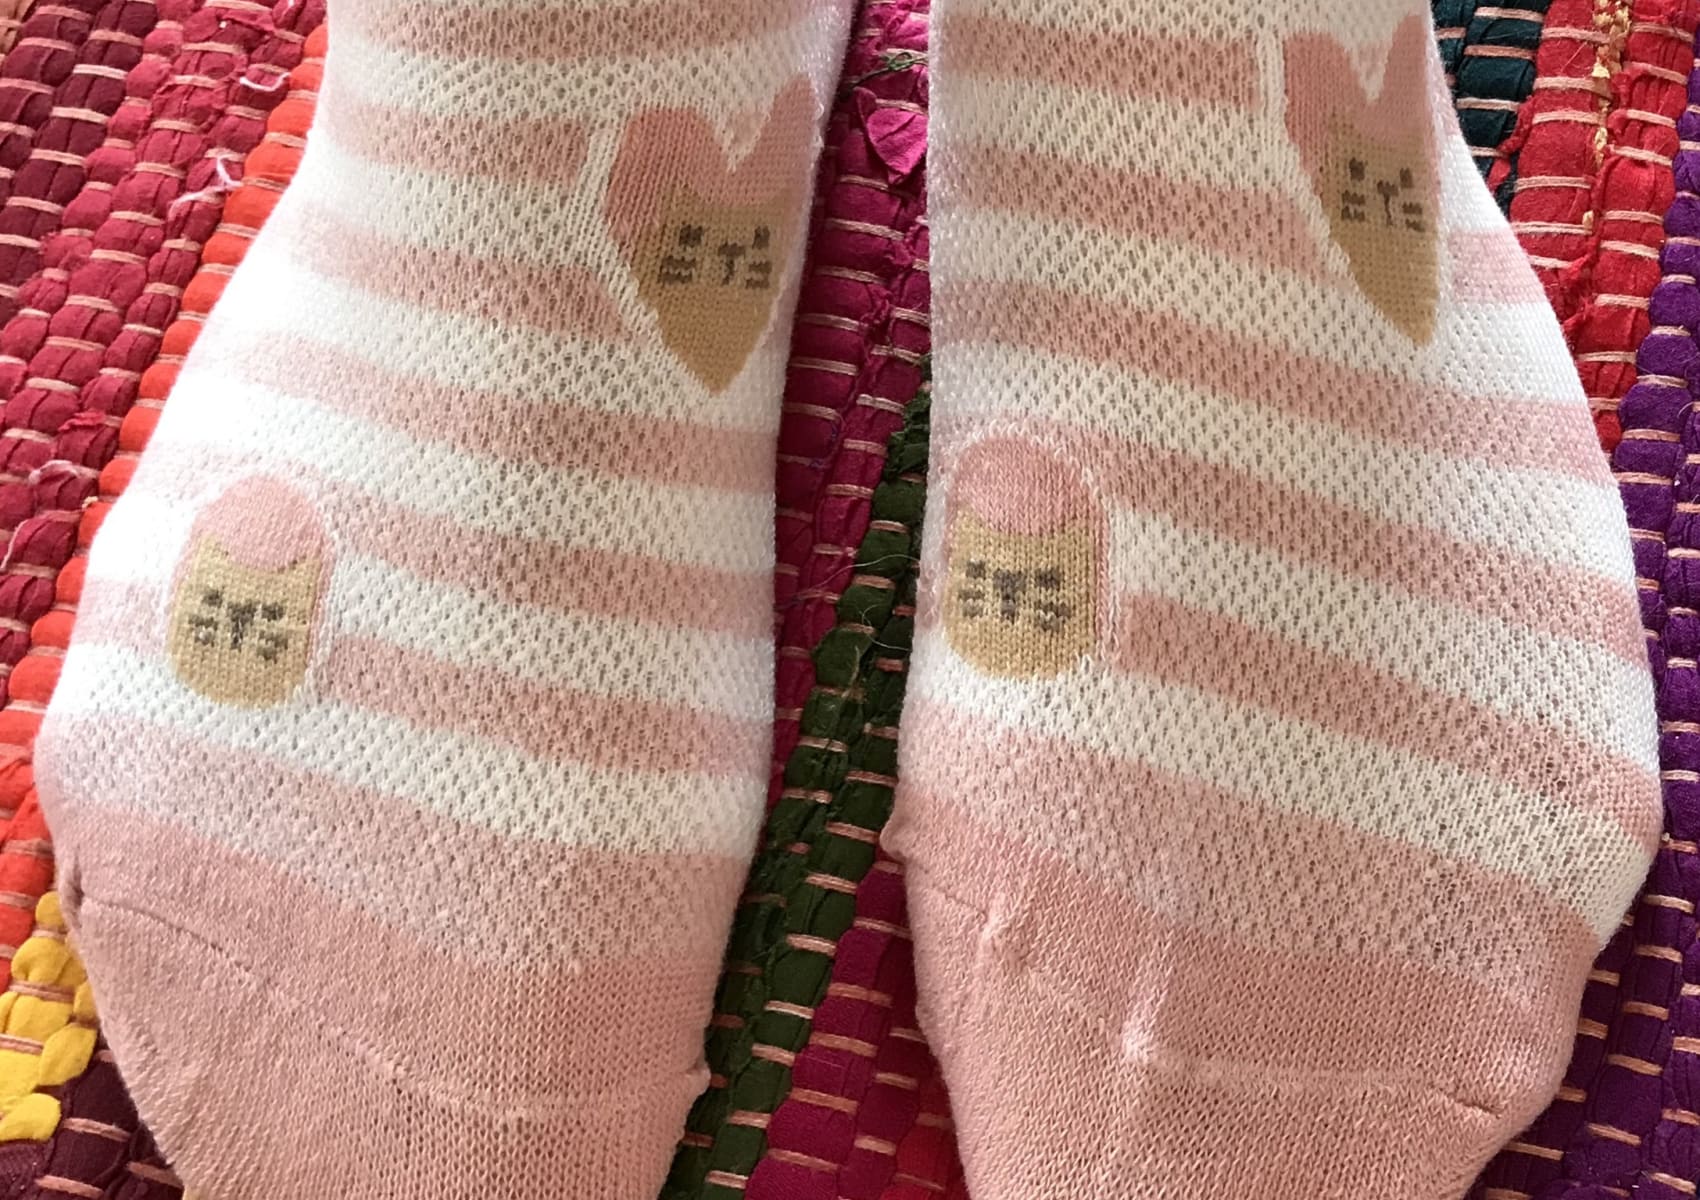 Pale pink striped shortie  socks with cute brown cat face